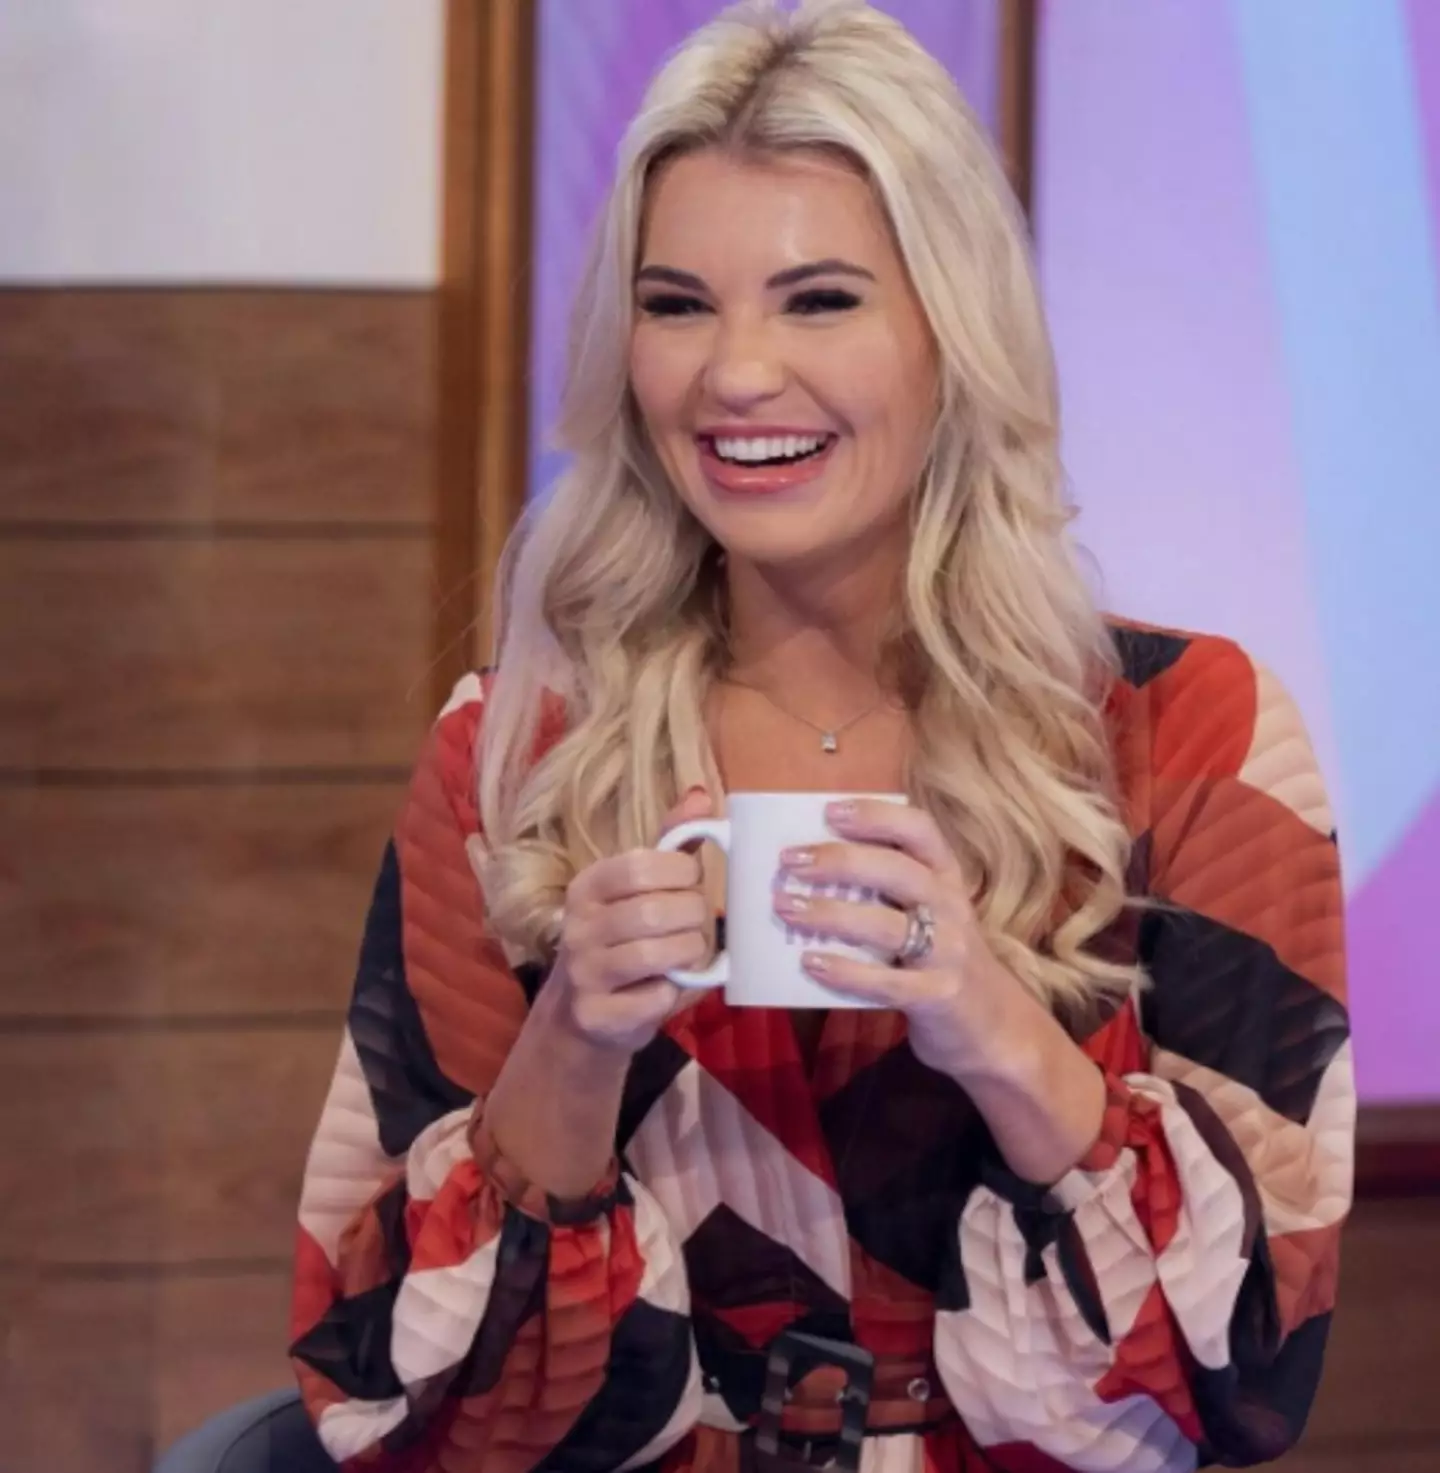 Christine will appear on Loose Women to talk about her diagnosis. [